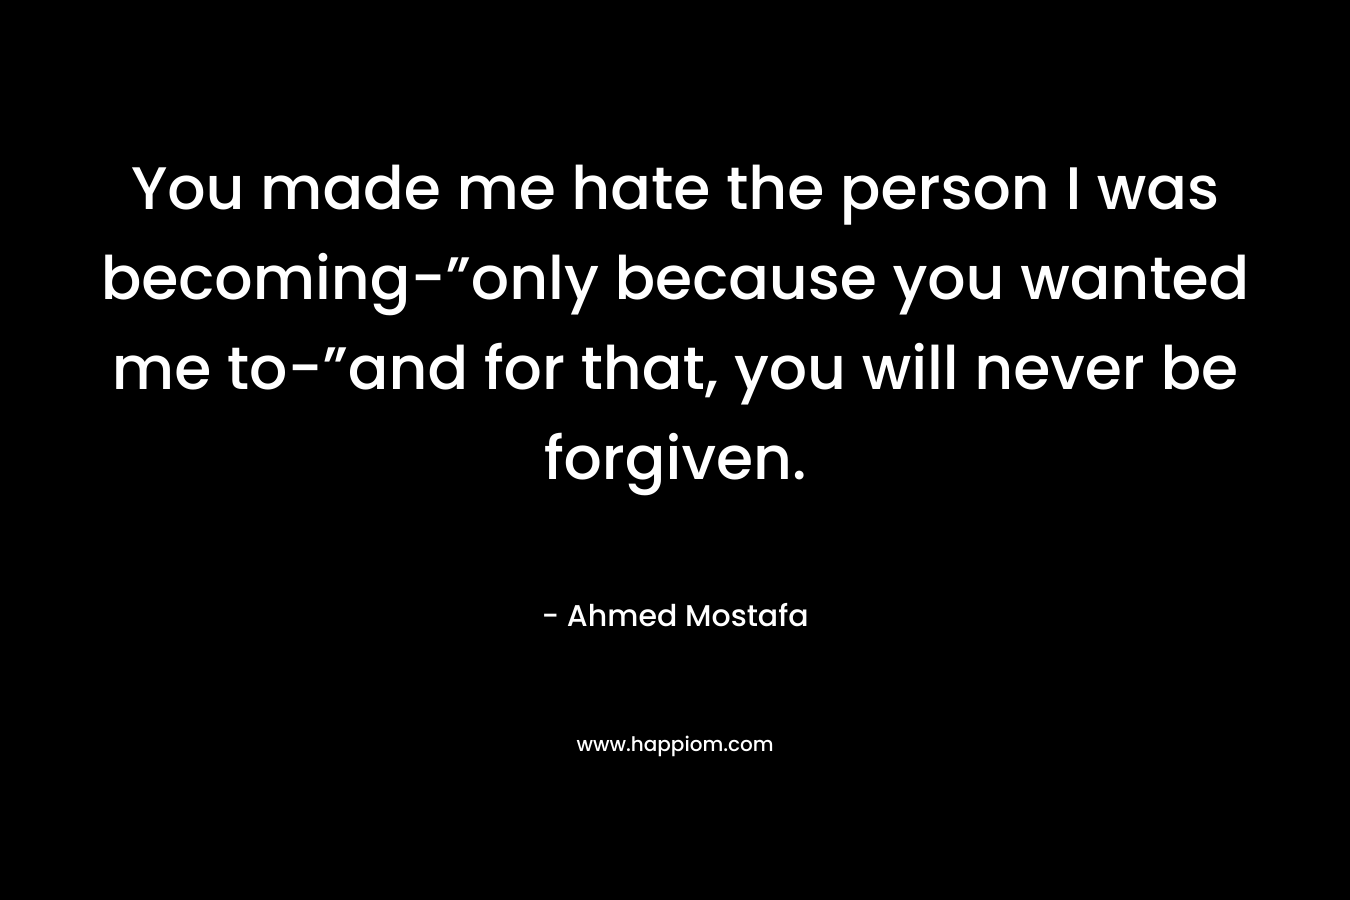 You made me hate the person I was becoming-”only because you wanted me to-”and for that, you will never be forgiven. – Ahmed Mostafa